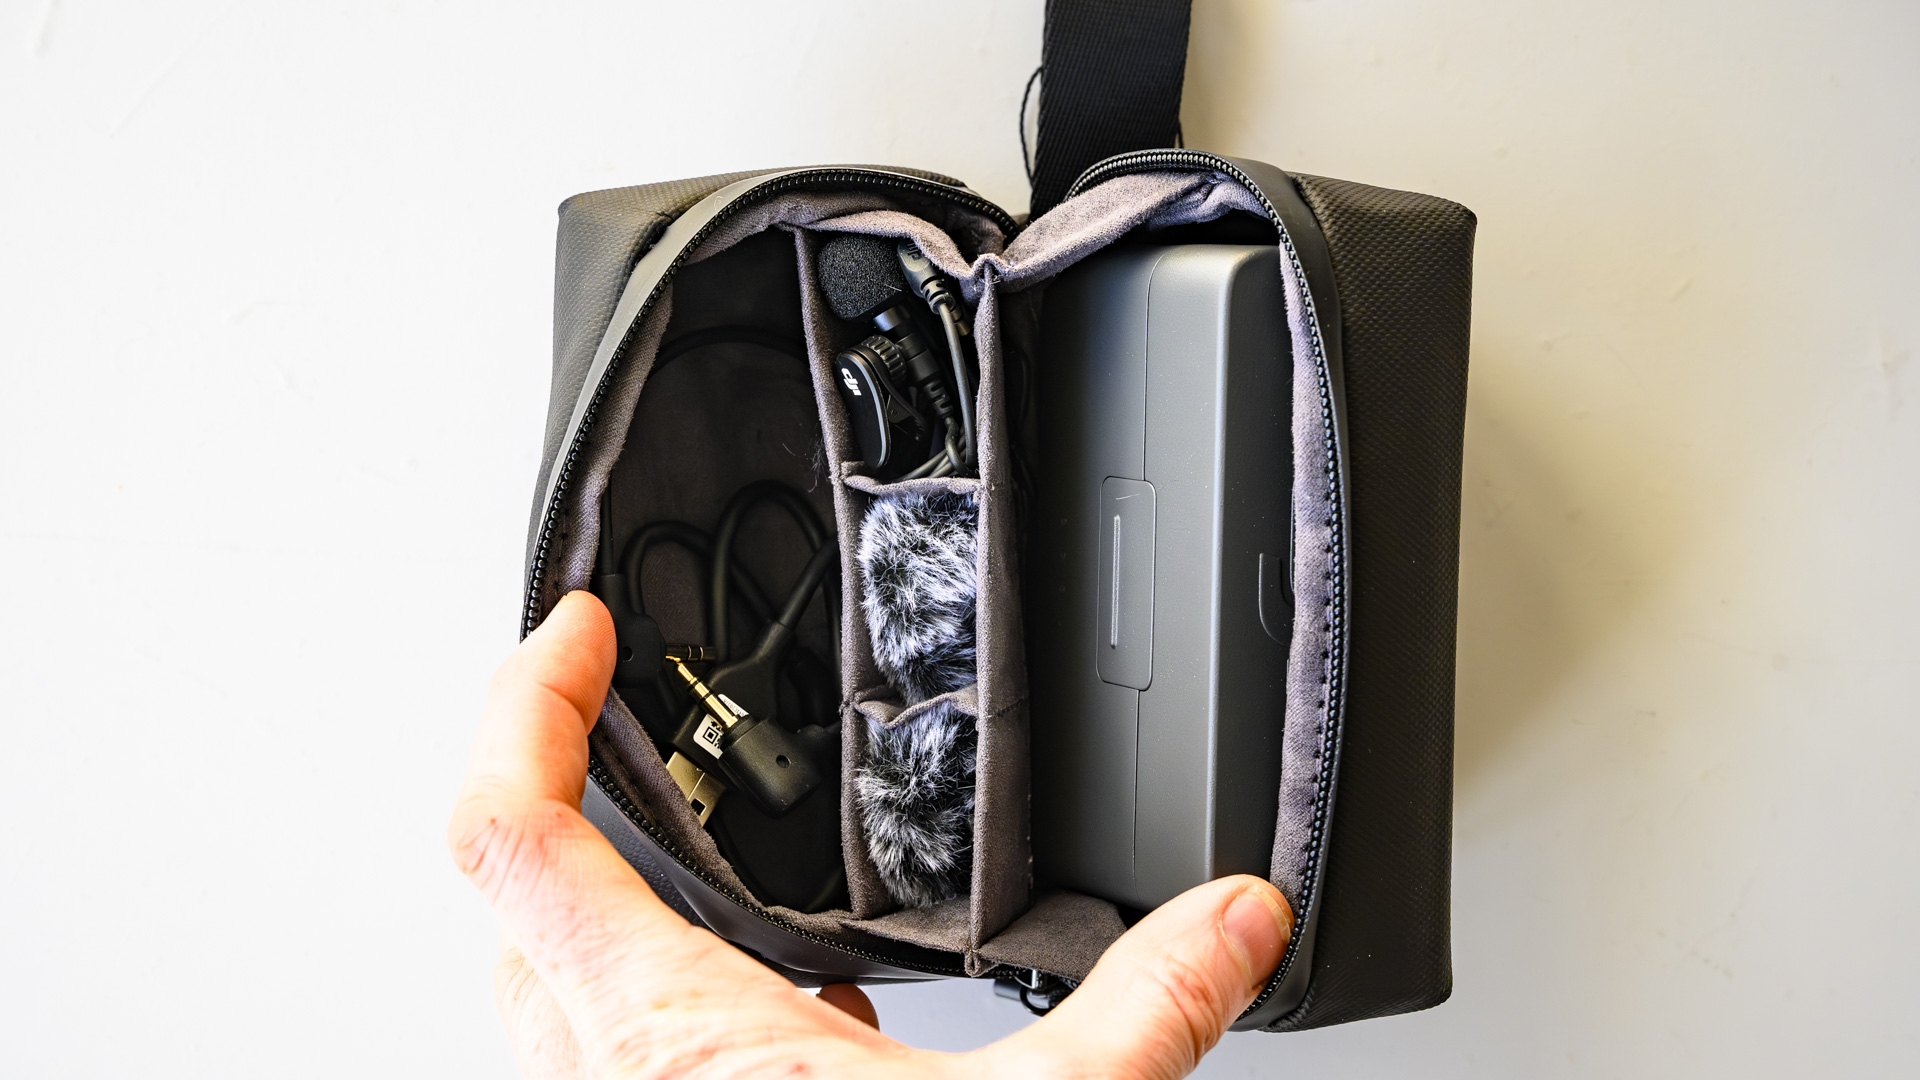 DJI Mic 2 complete kit in its carry case